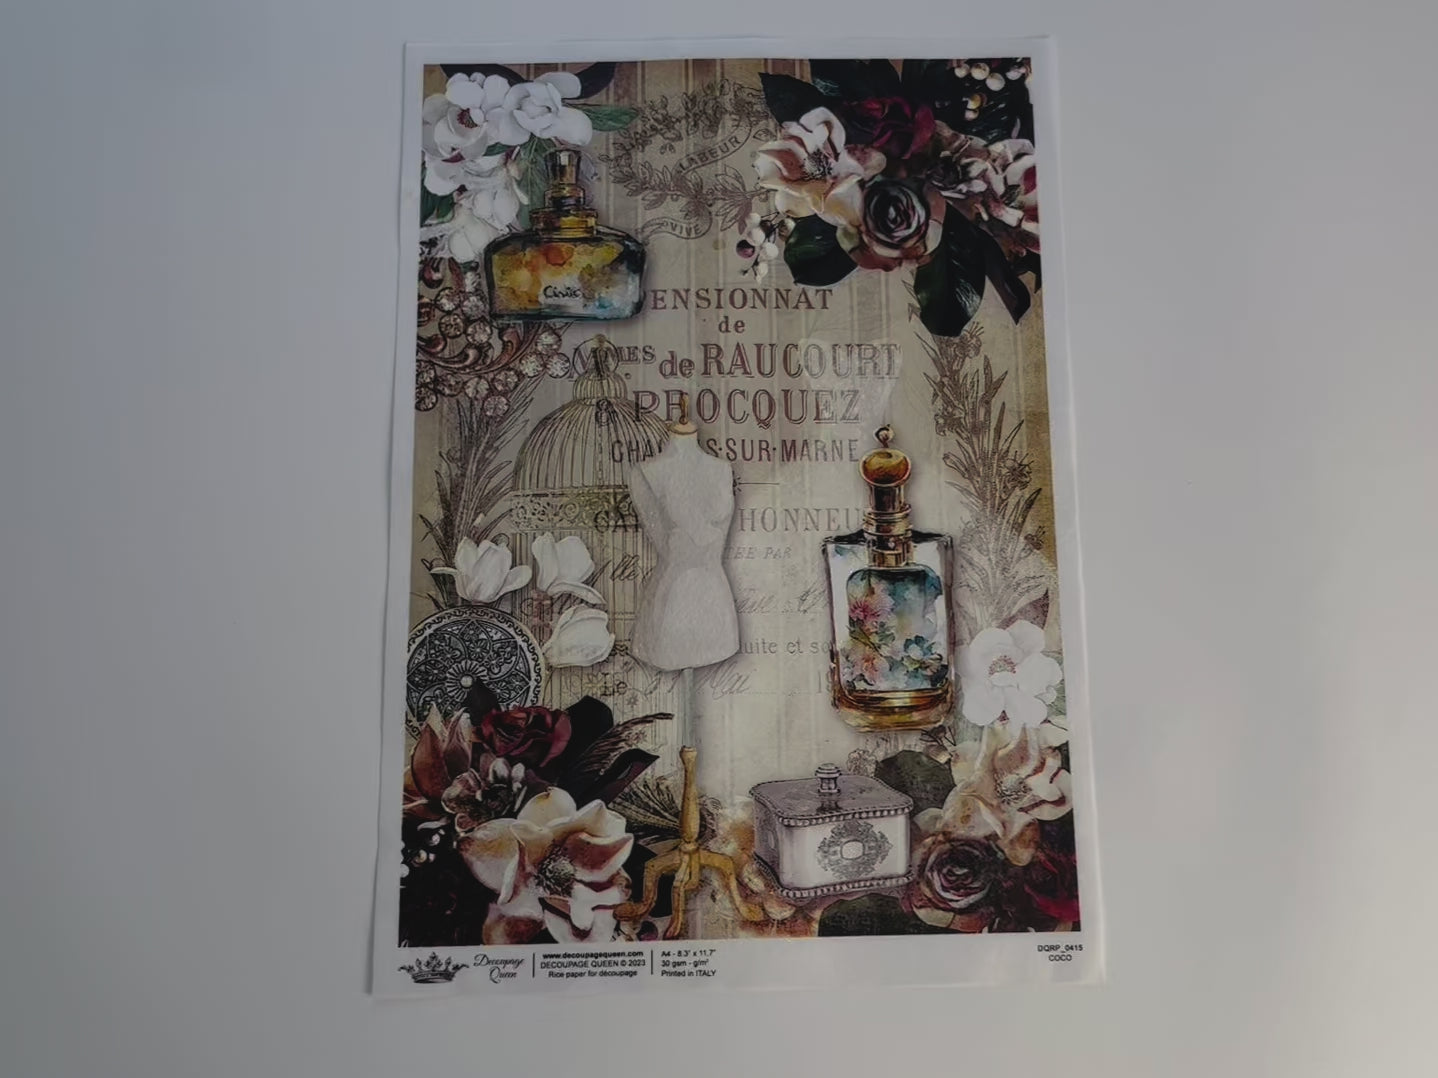 A 10 second video shows a close-up and hand lifting the bottom right hand corner of Decoupage Queen's Coco A4 rice paper against a white background.